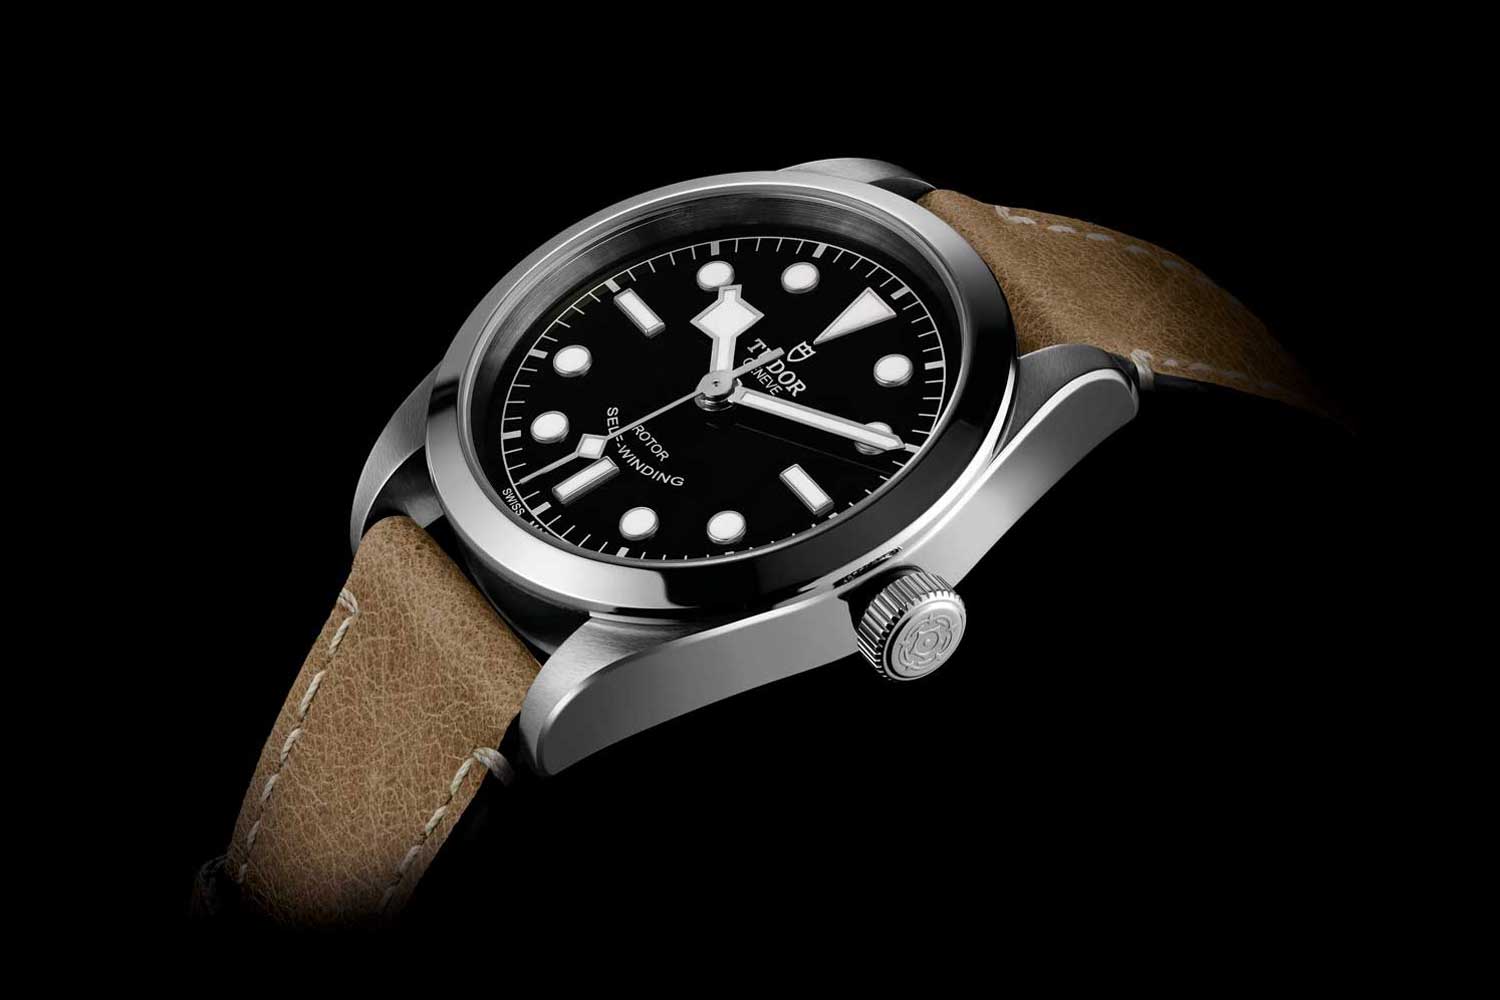 The bezel-less Black Bay 36 unveiled at Baselworld 2016